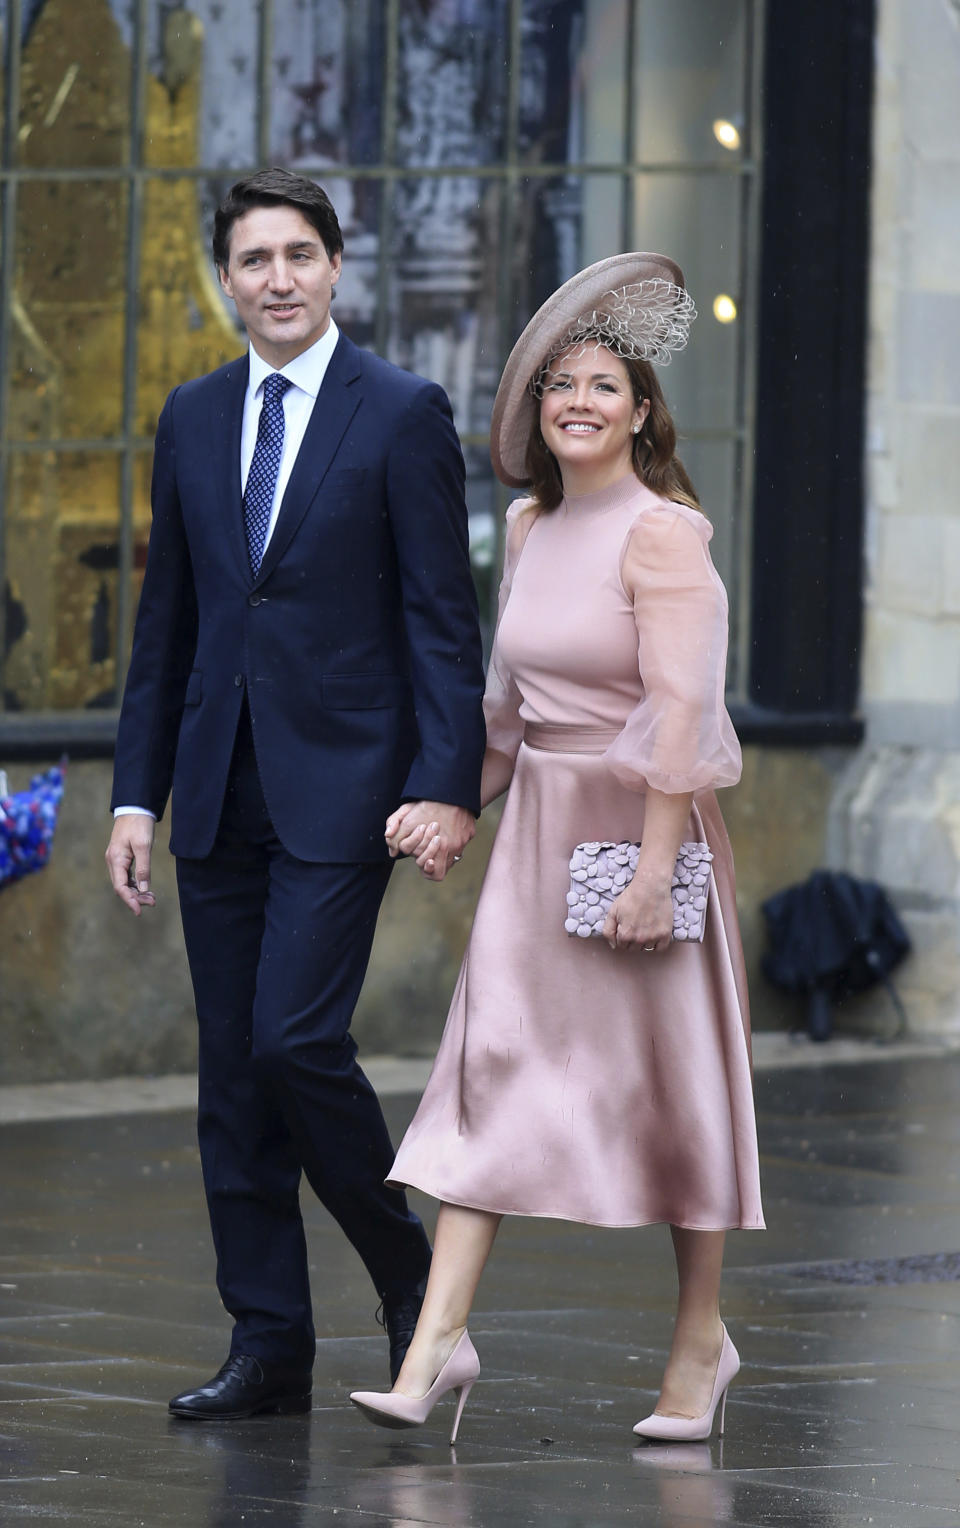 Prime Minister of Canada Justin Trudeau and his wife Sophie arrive at Westminster Abbey for the coronation of King Charles III in London, Saturday, May 6, 2023. (Peter Tarry/Pool Photo via AP)